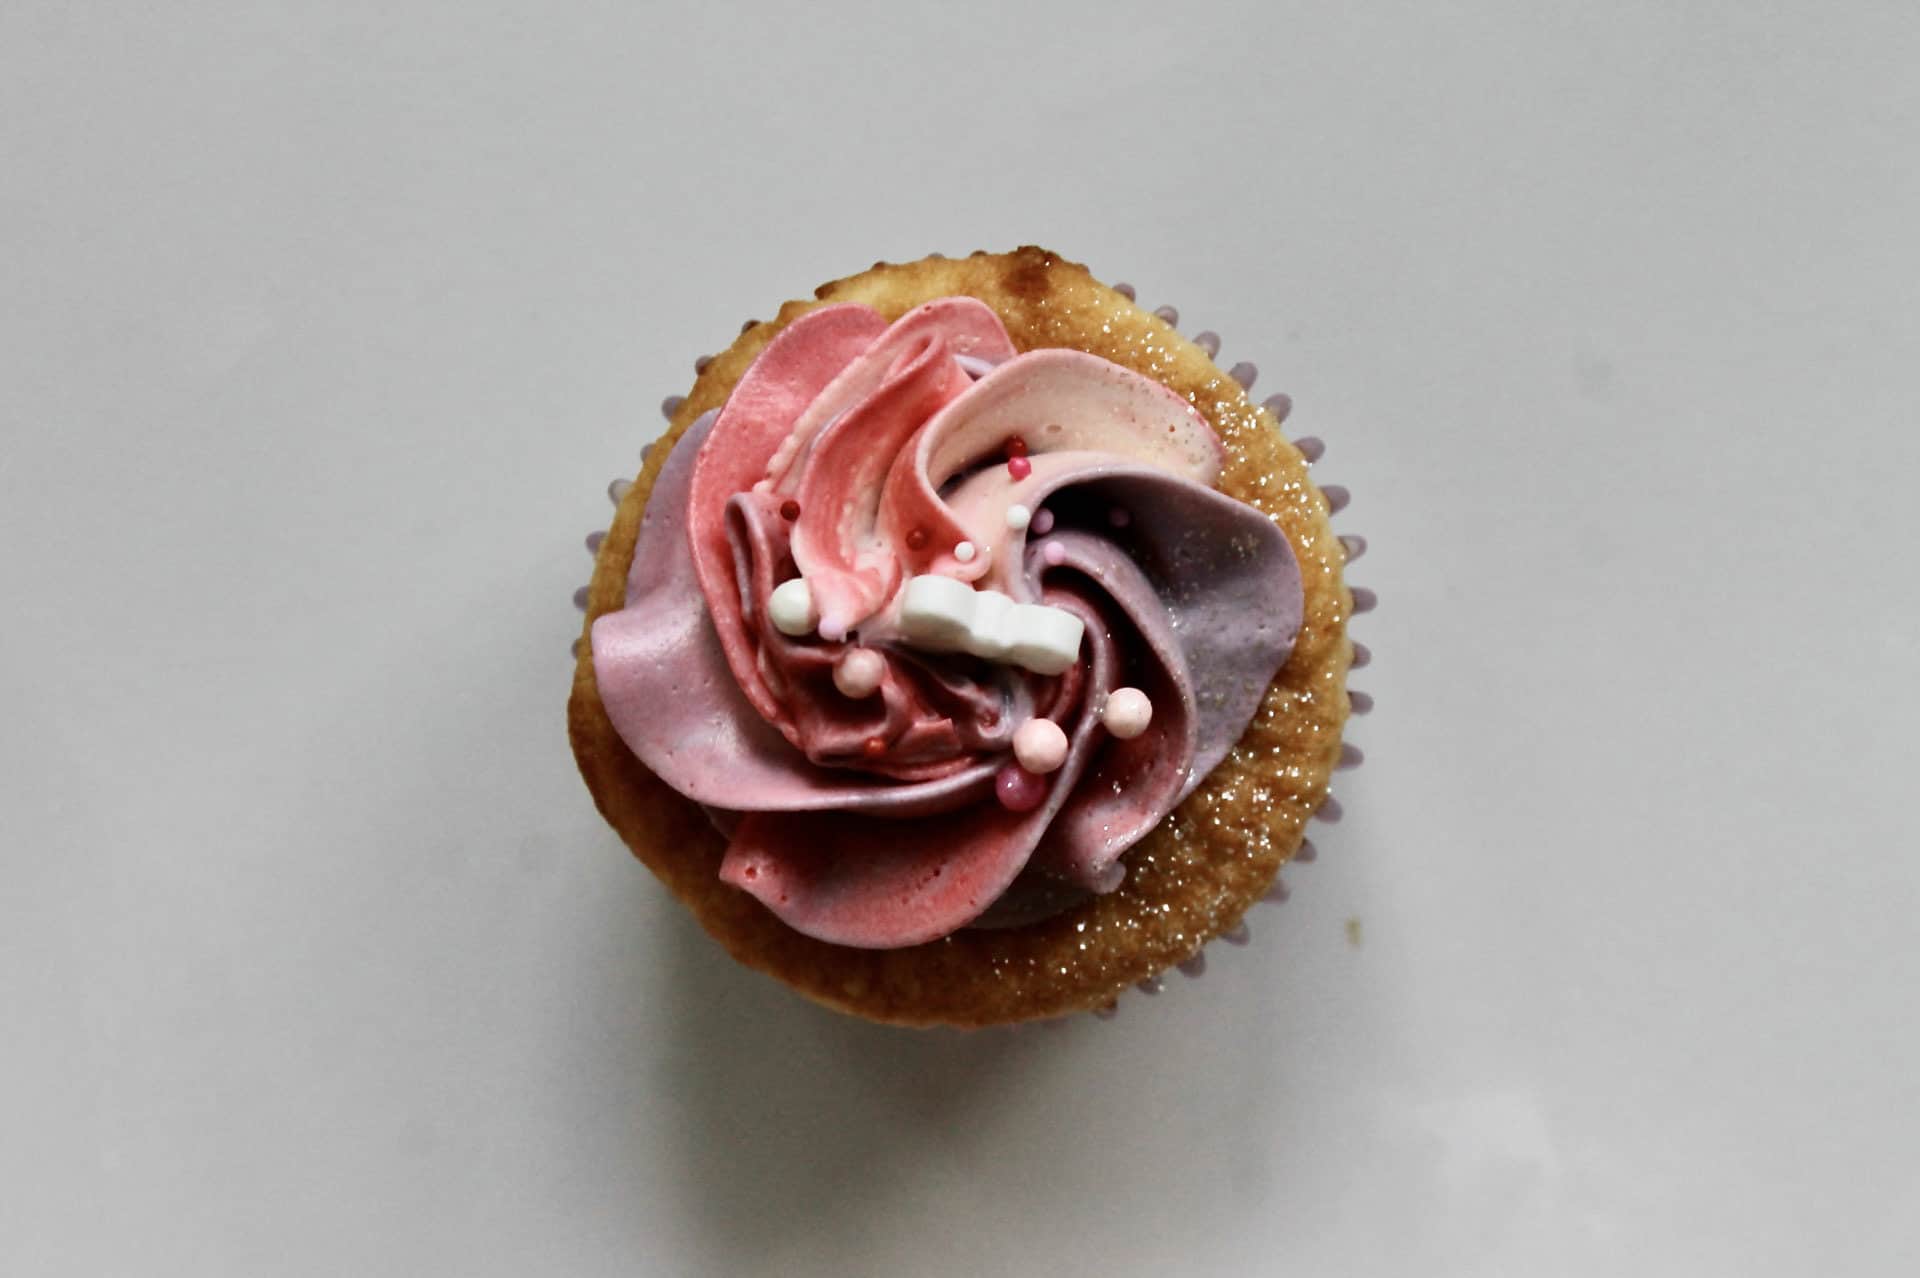 Frosting a Cupcake: Pipe or Swirl?